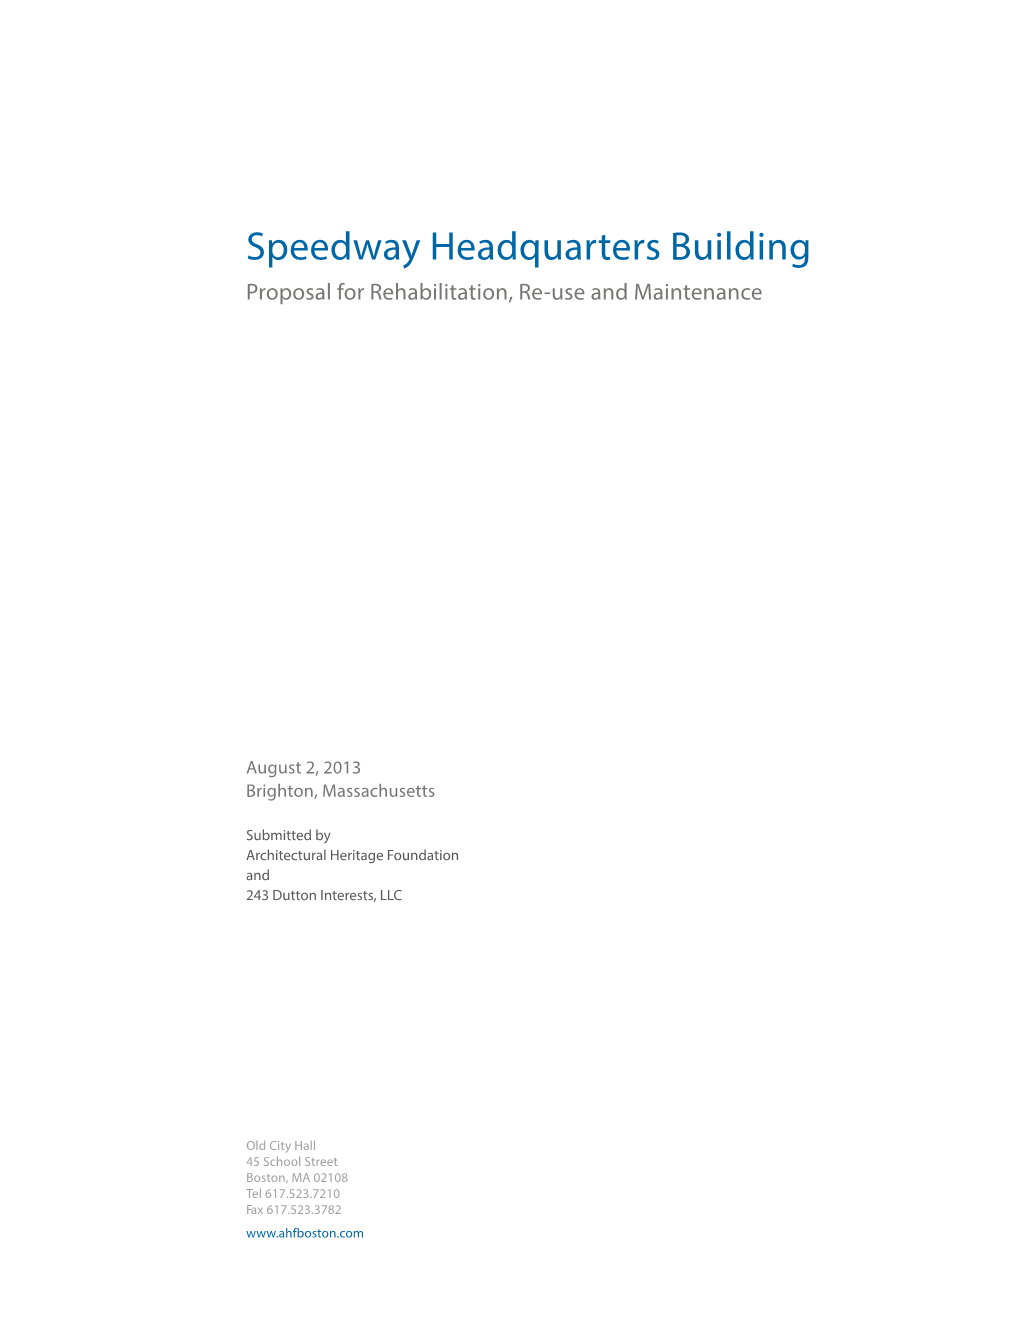 Speedway Headquarters Building Proposal for Rehabilitation, Re-Use and Maintenance